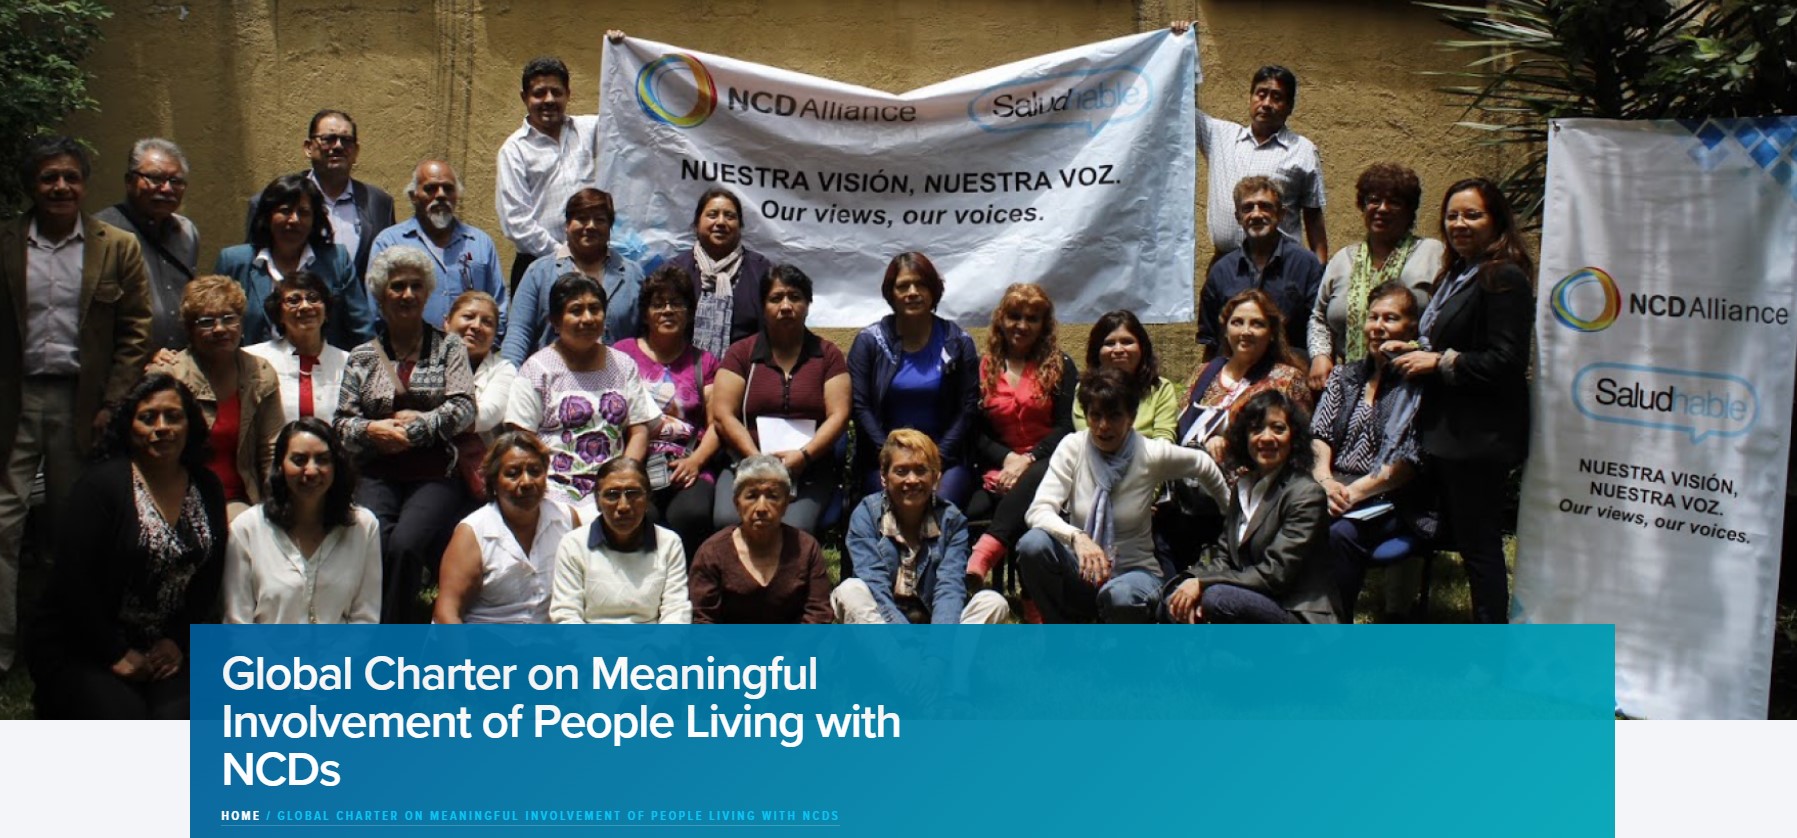 Global Charter on Meaningful Involvement of People Living with NCDs